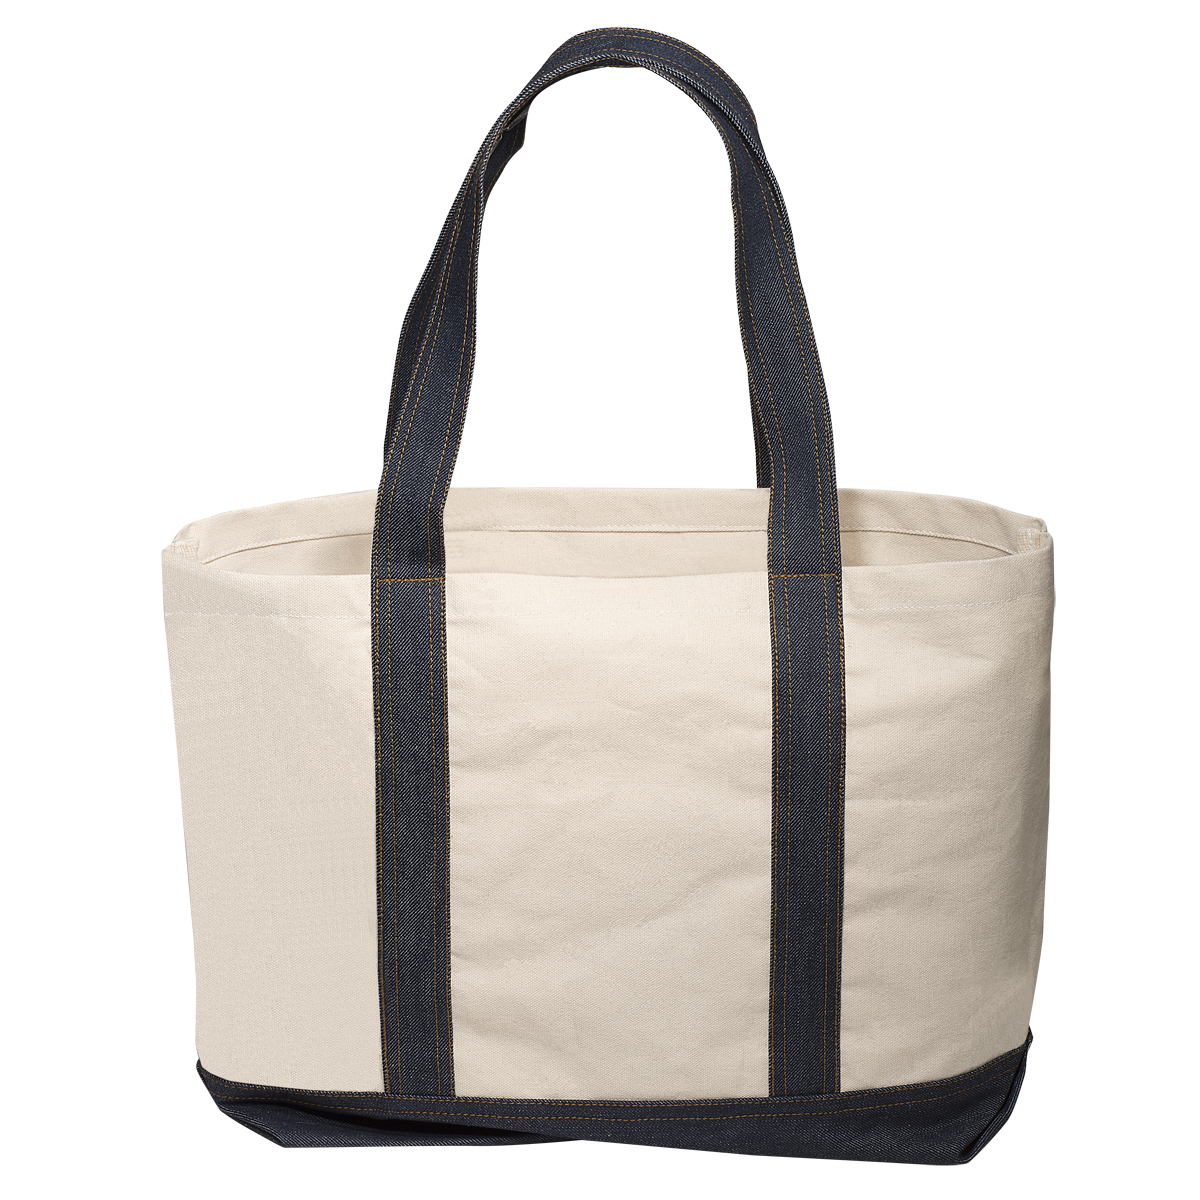 Cotton Tote with Denim Accents